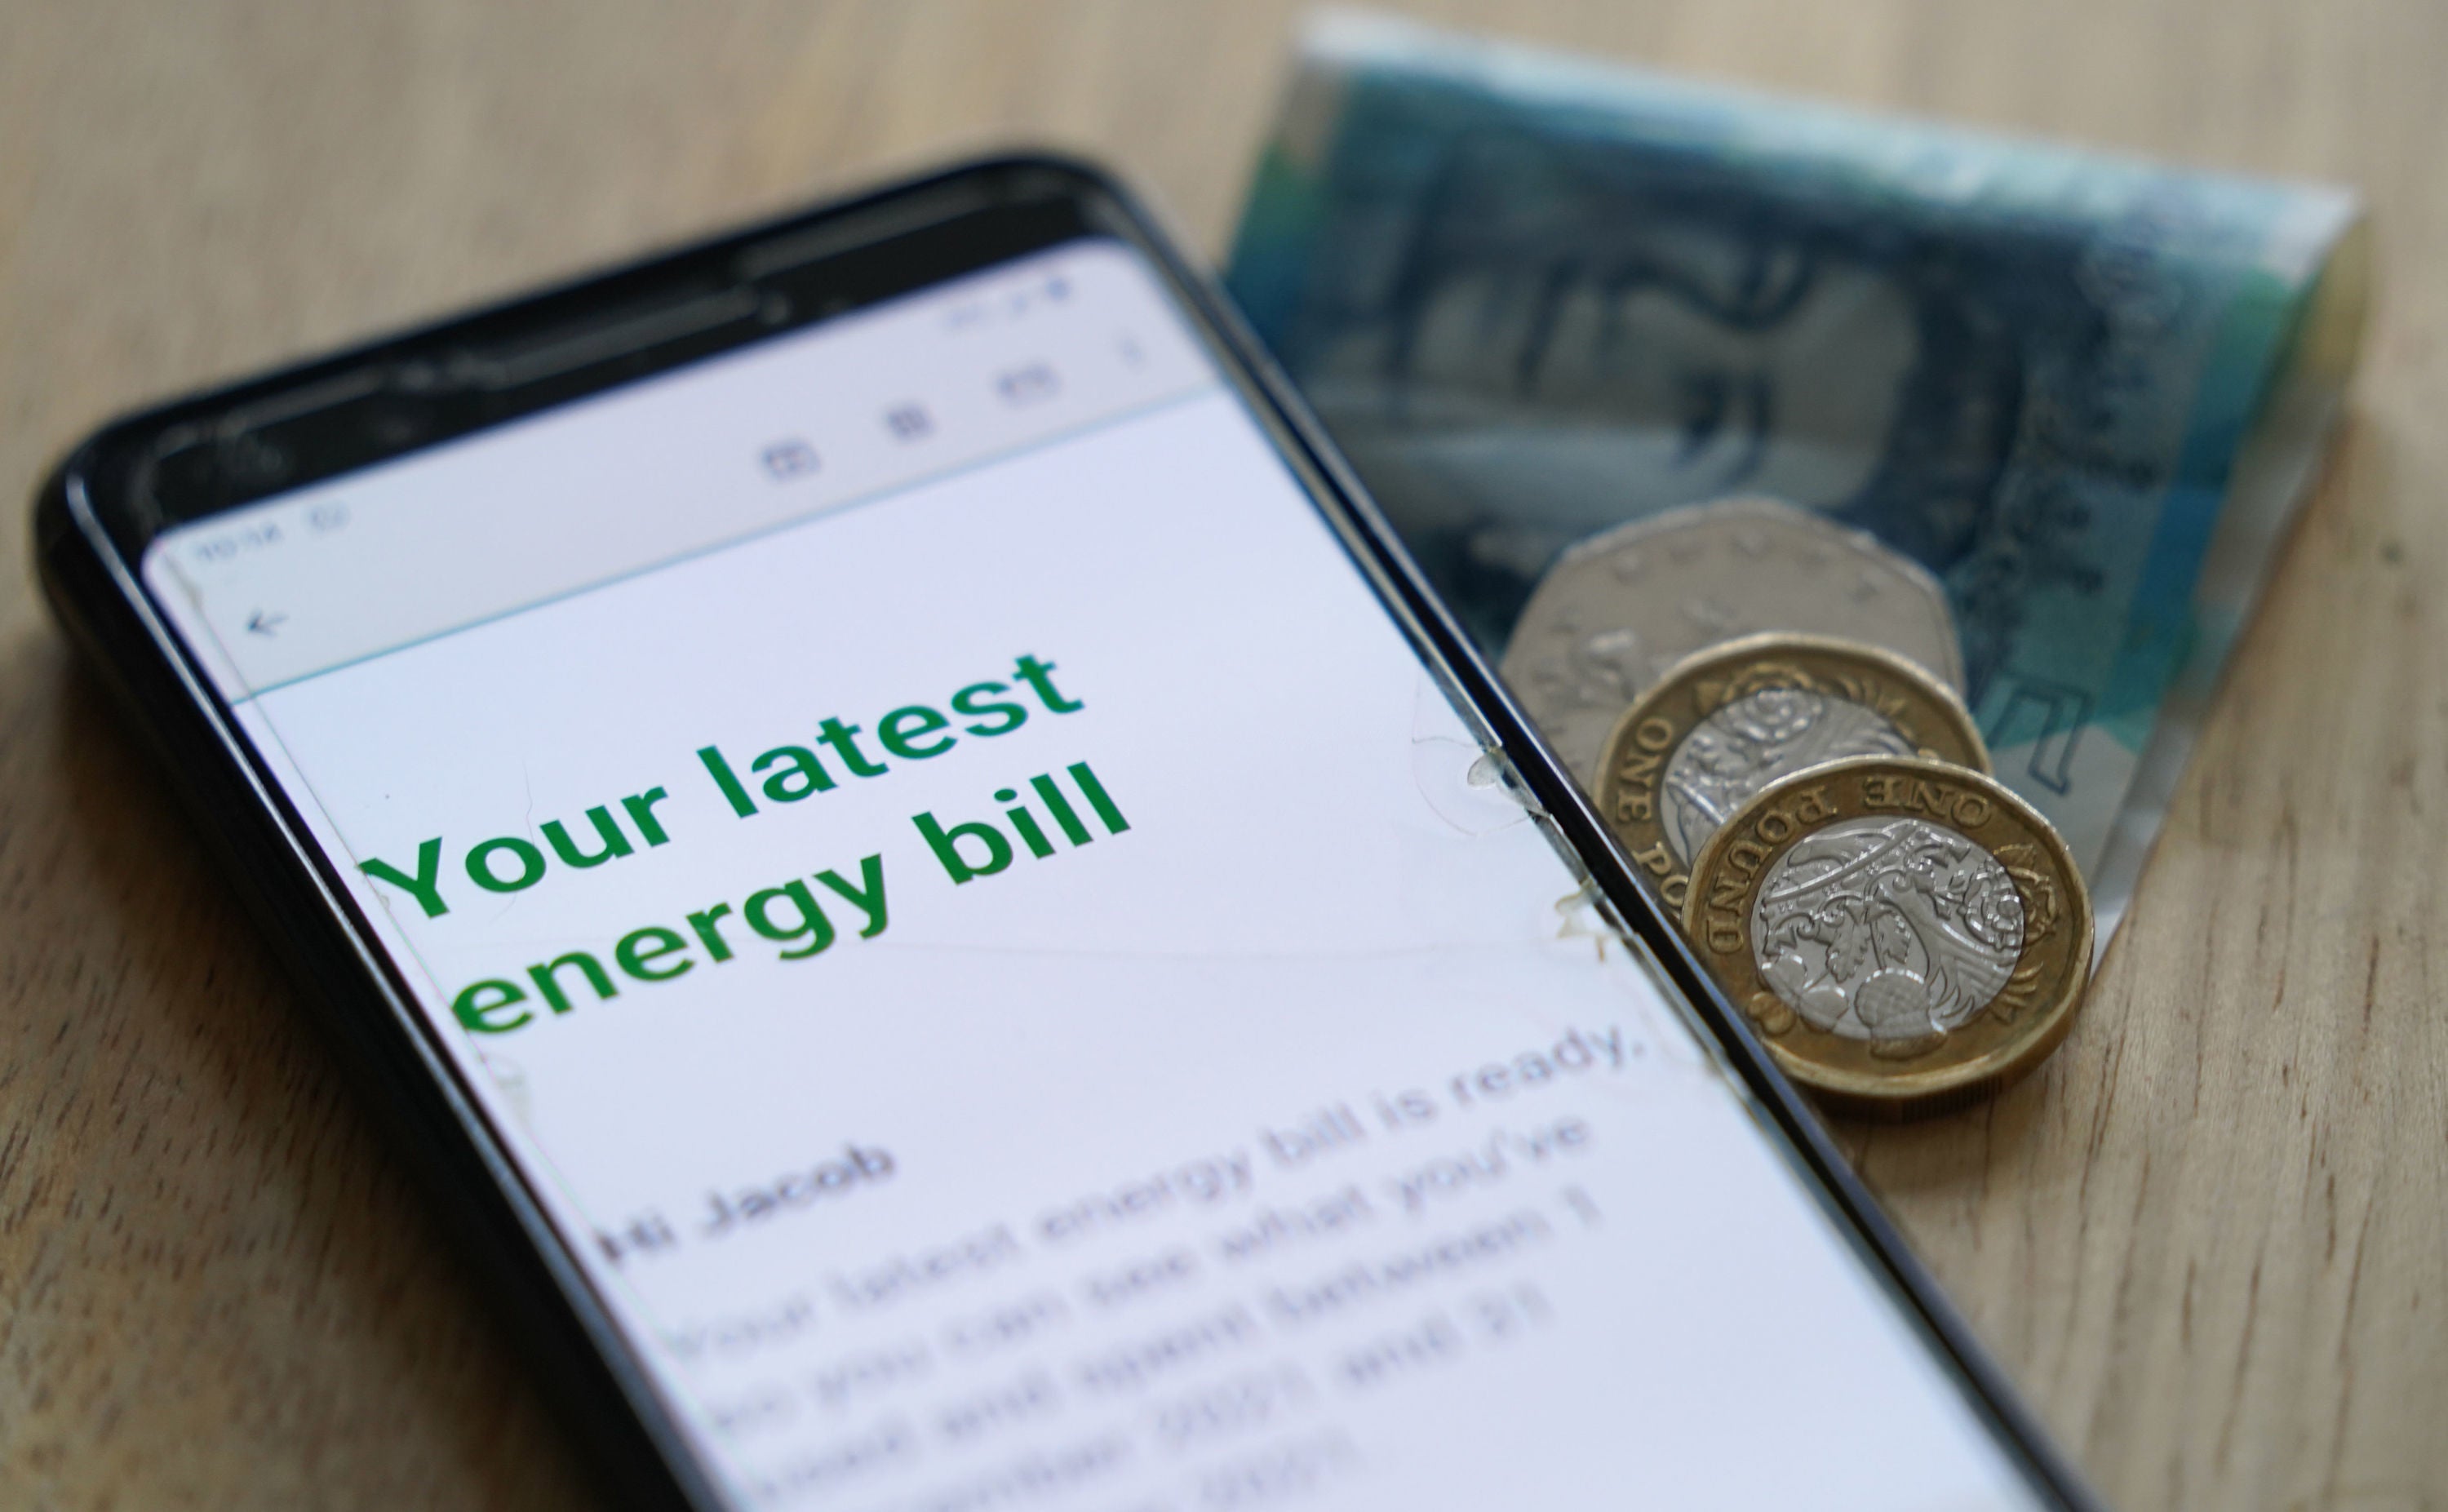 Millions of householders will pay 5 per cent more for their gas and electricity bills in the new year